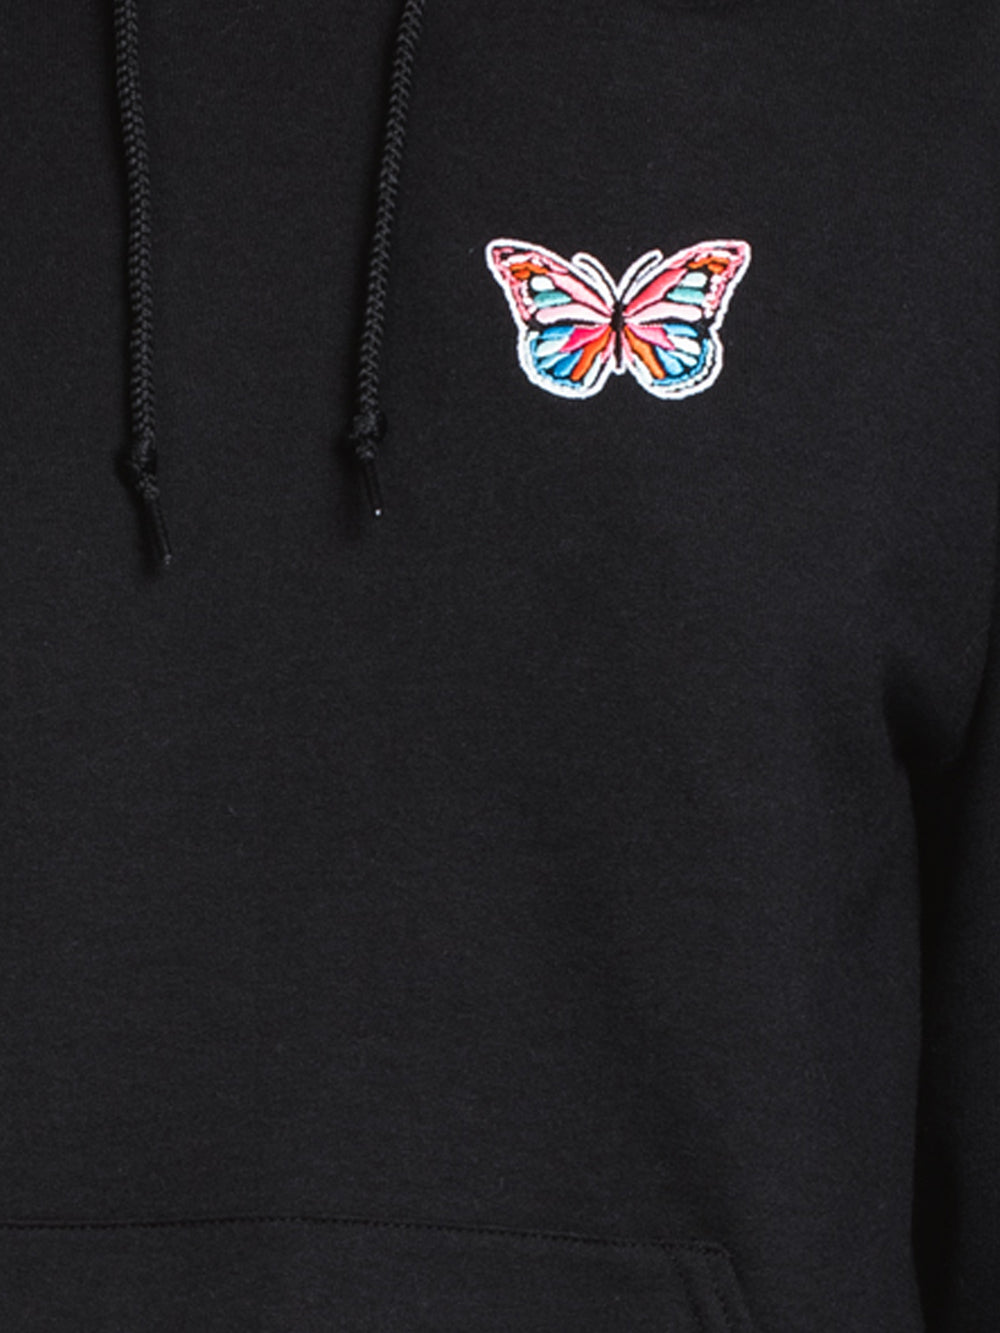 HOTLINE APPAREL UNISEX BUTTERFLY EMBROIDERED HOODIE - BLACK - CLEARANCE